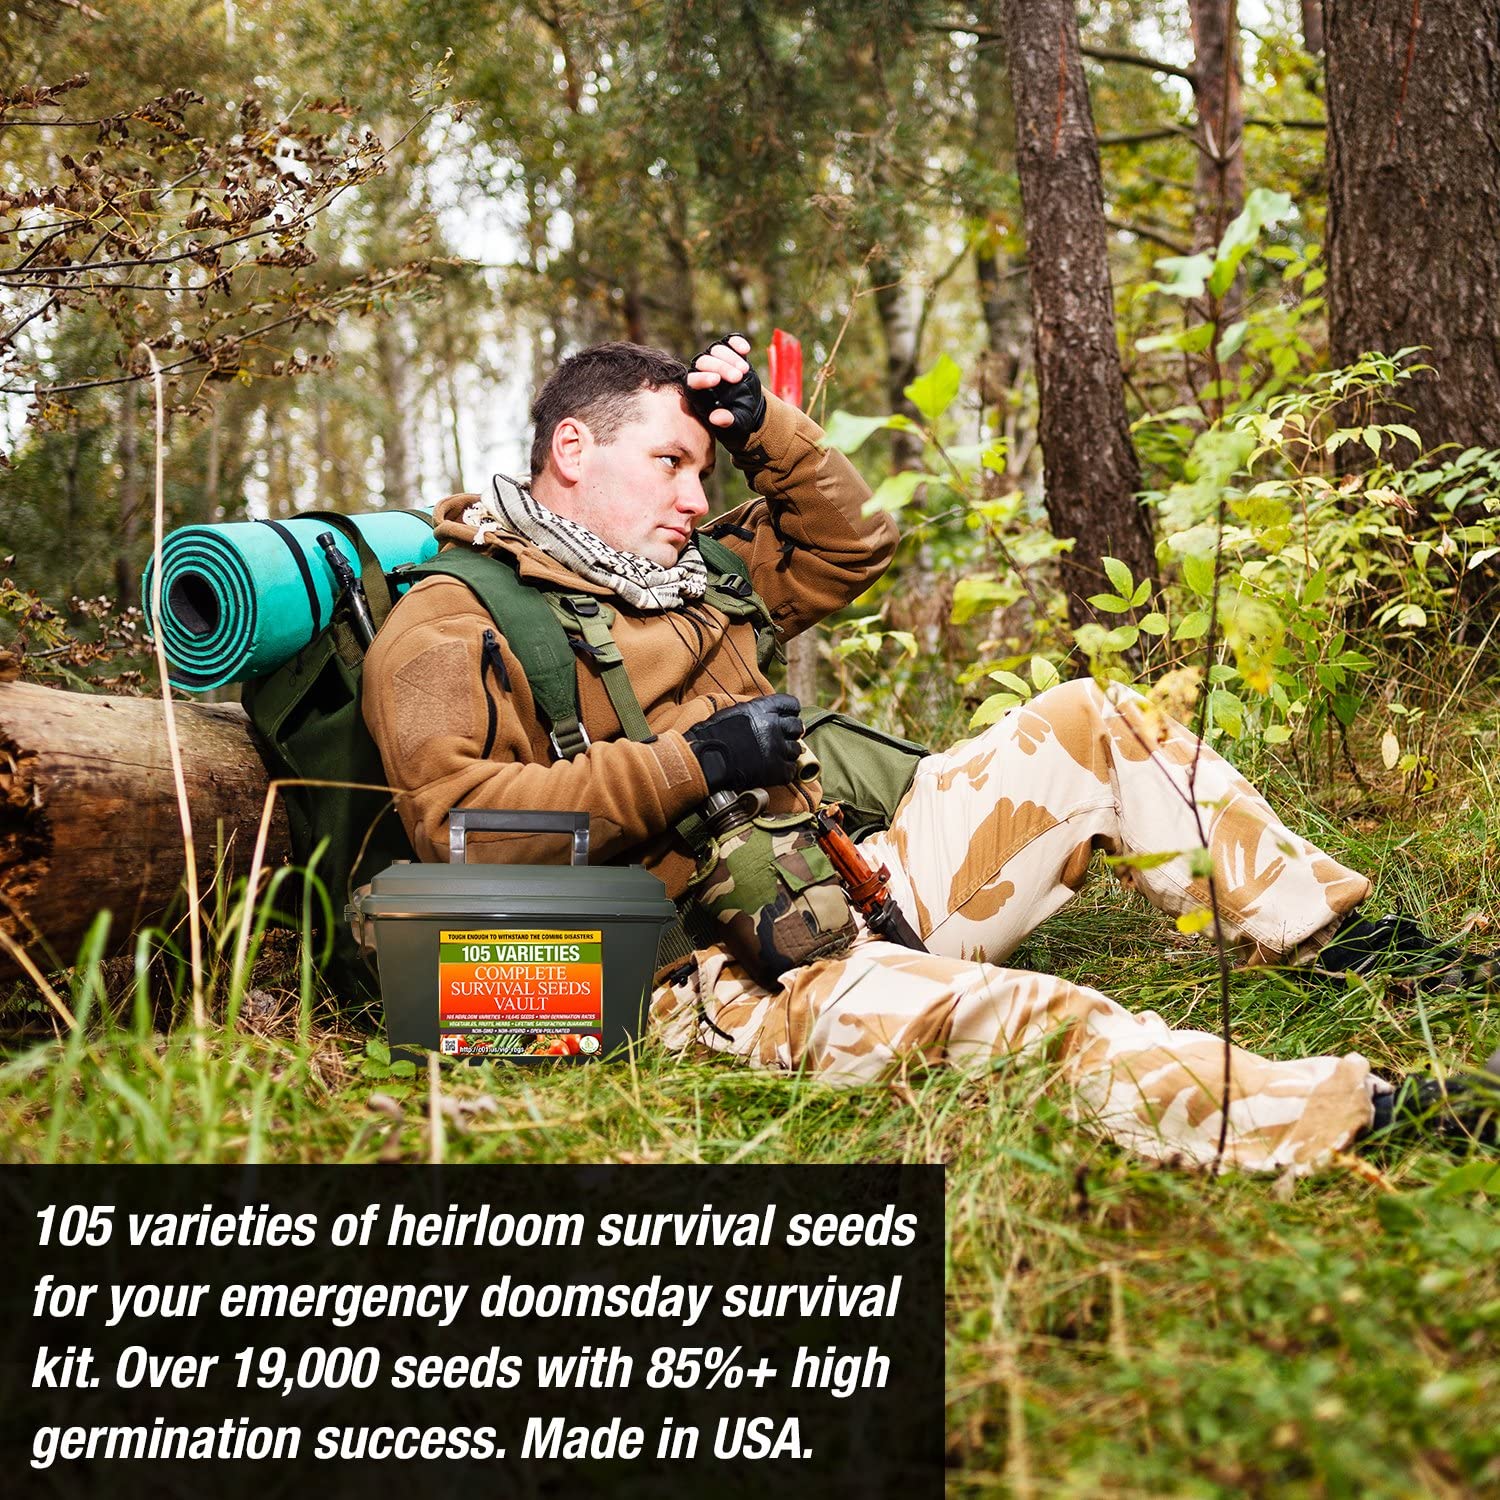 Man in the forest with 105 Varieties of heirloom survival seeds